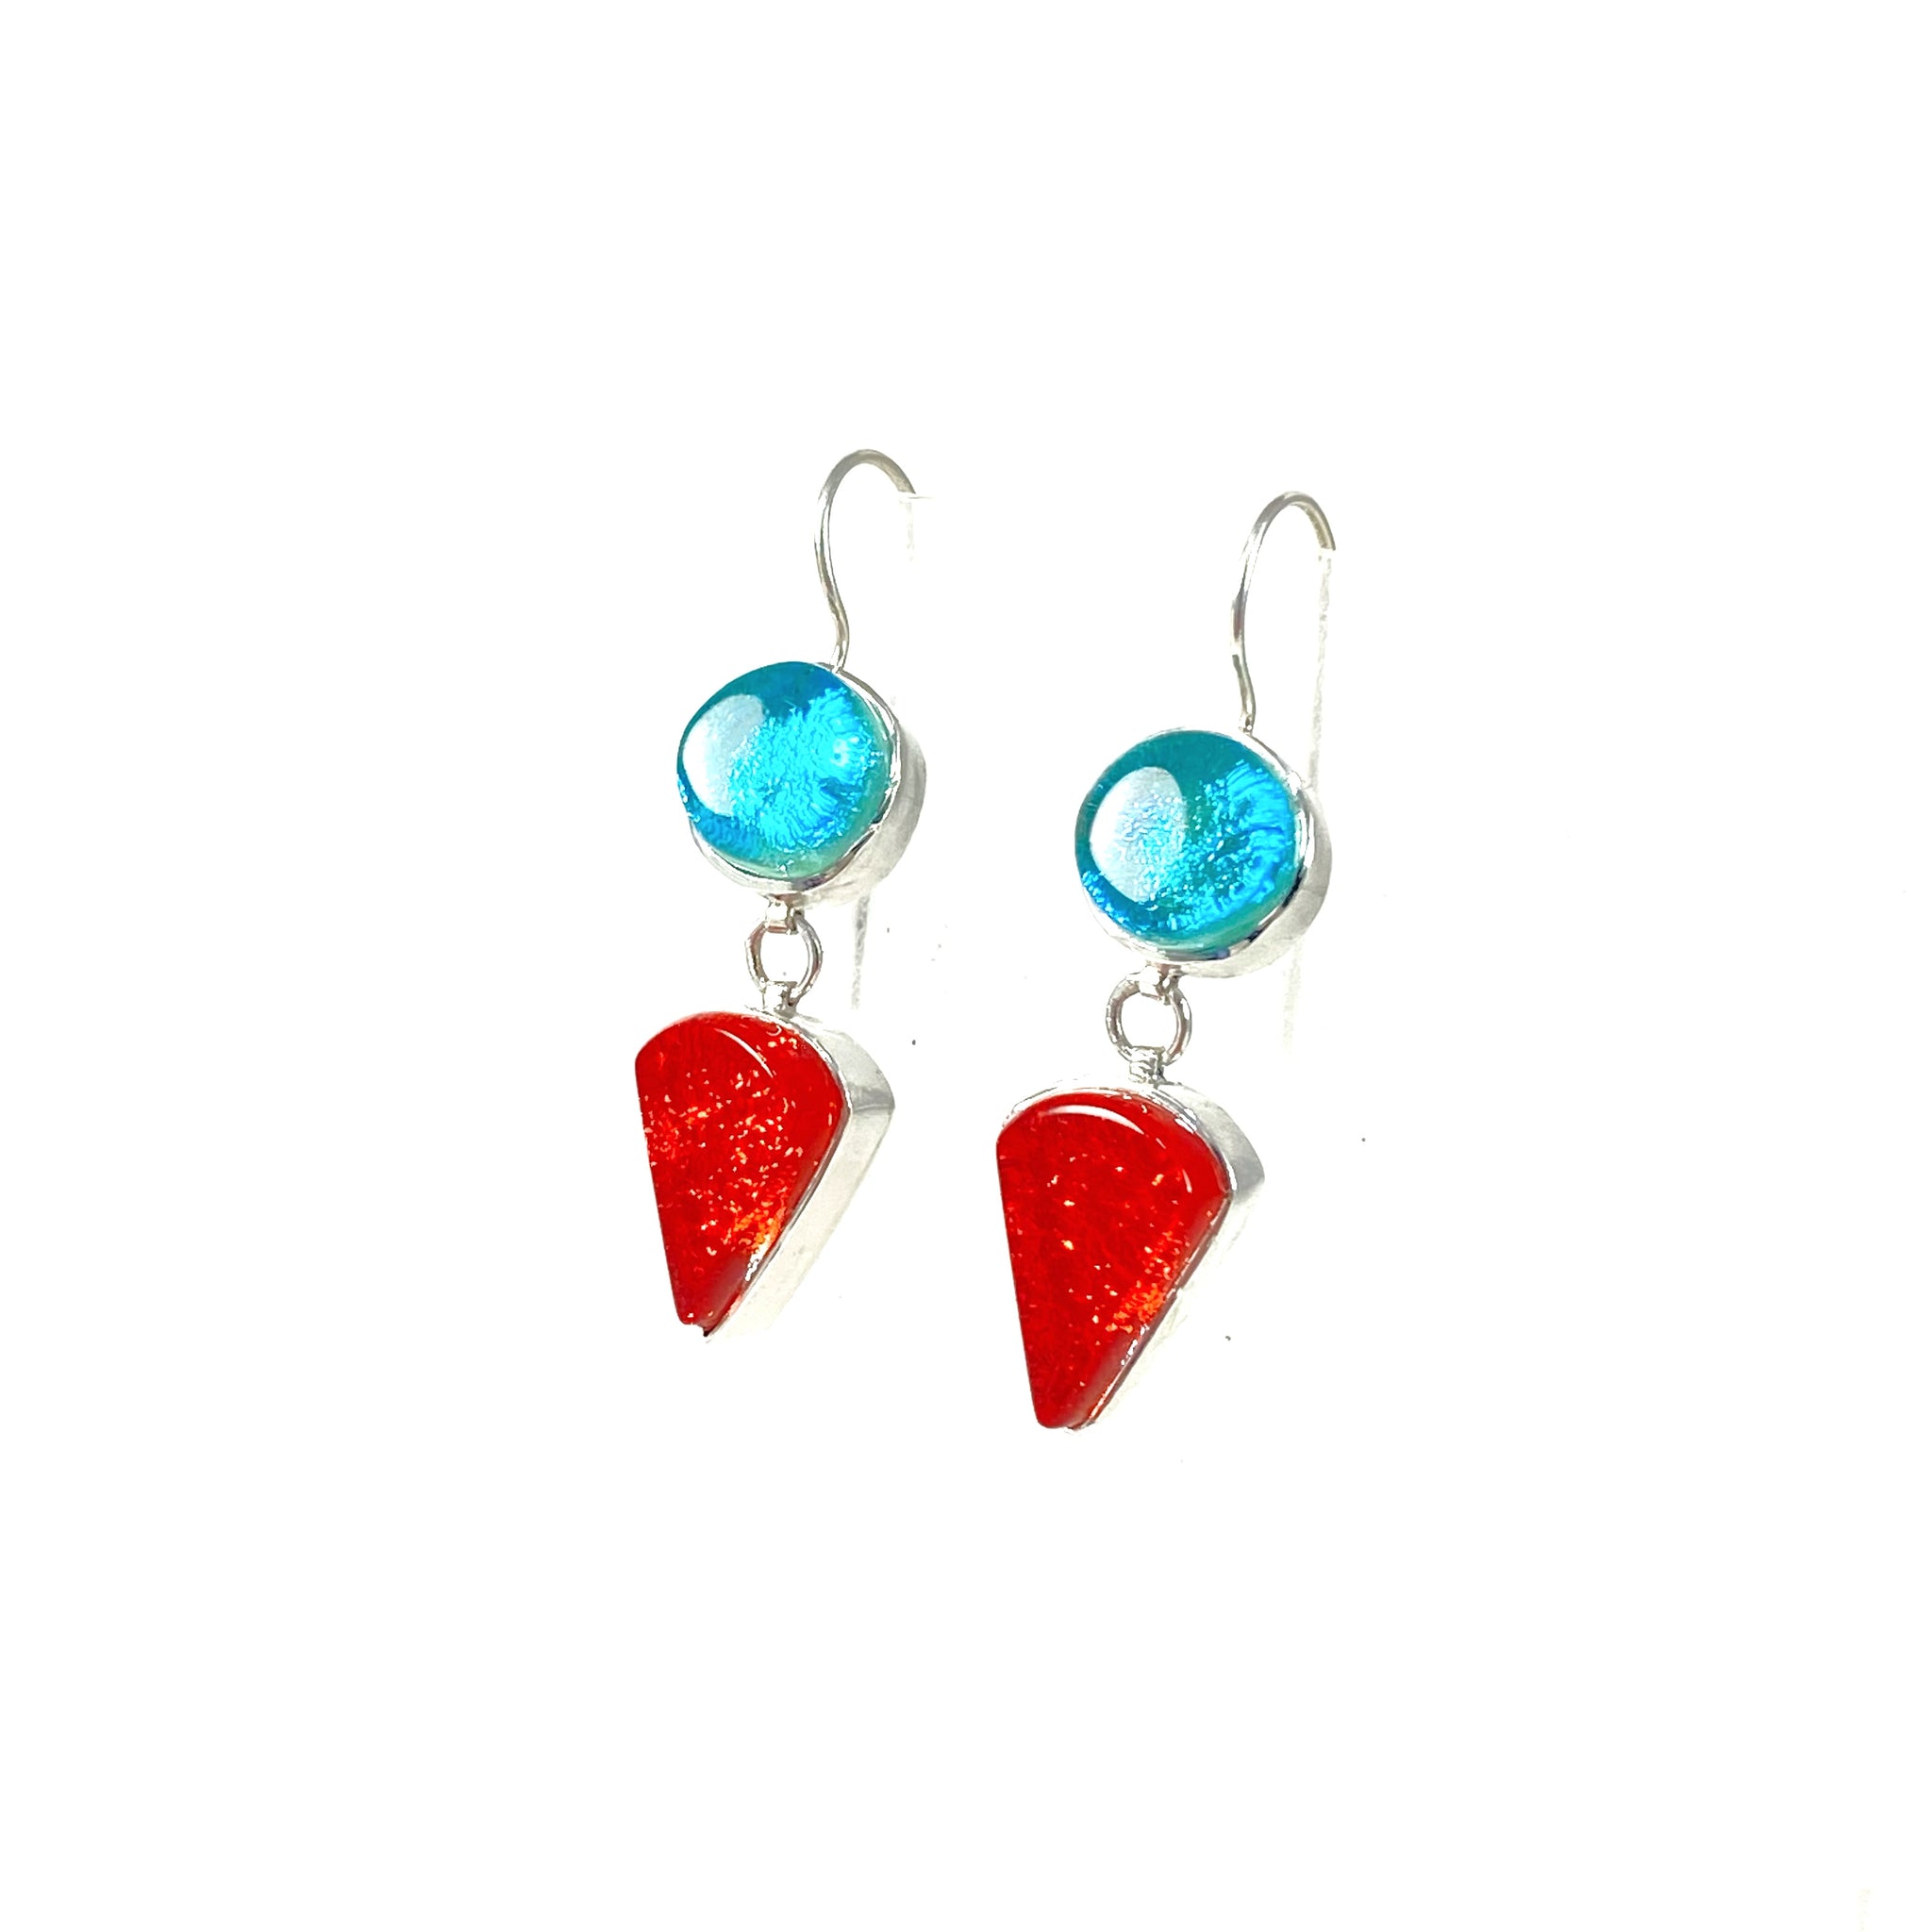 Small Double Drop Earrings in Caribbean and Sangria